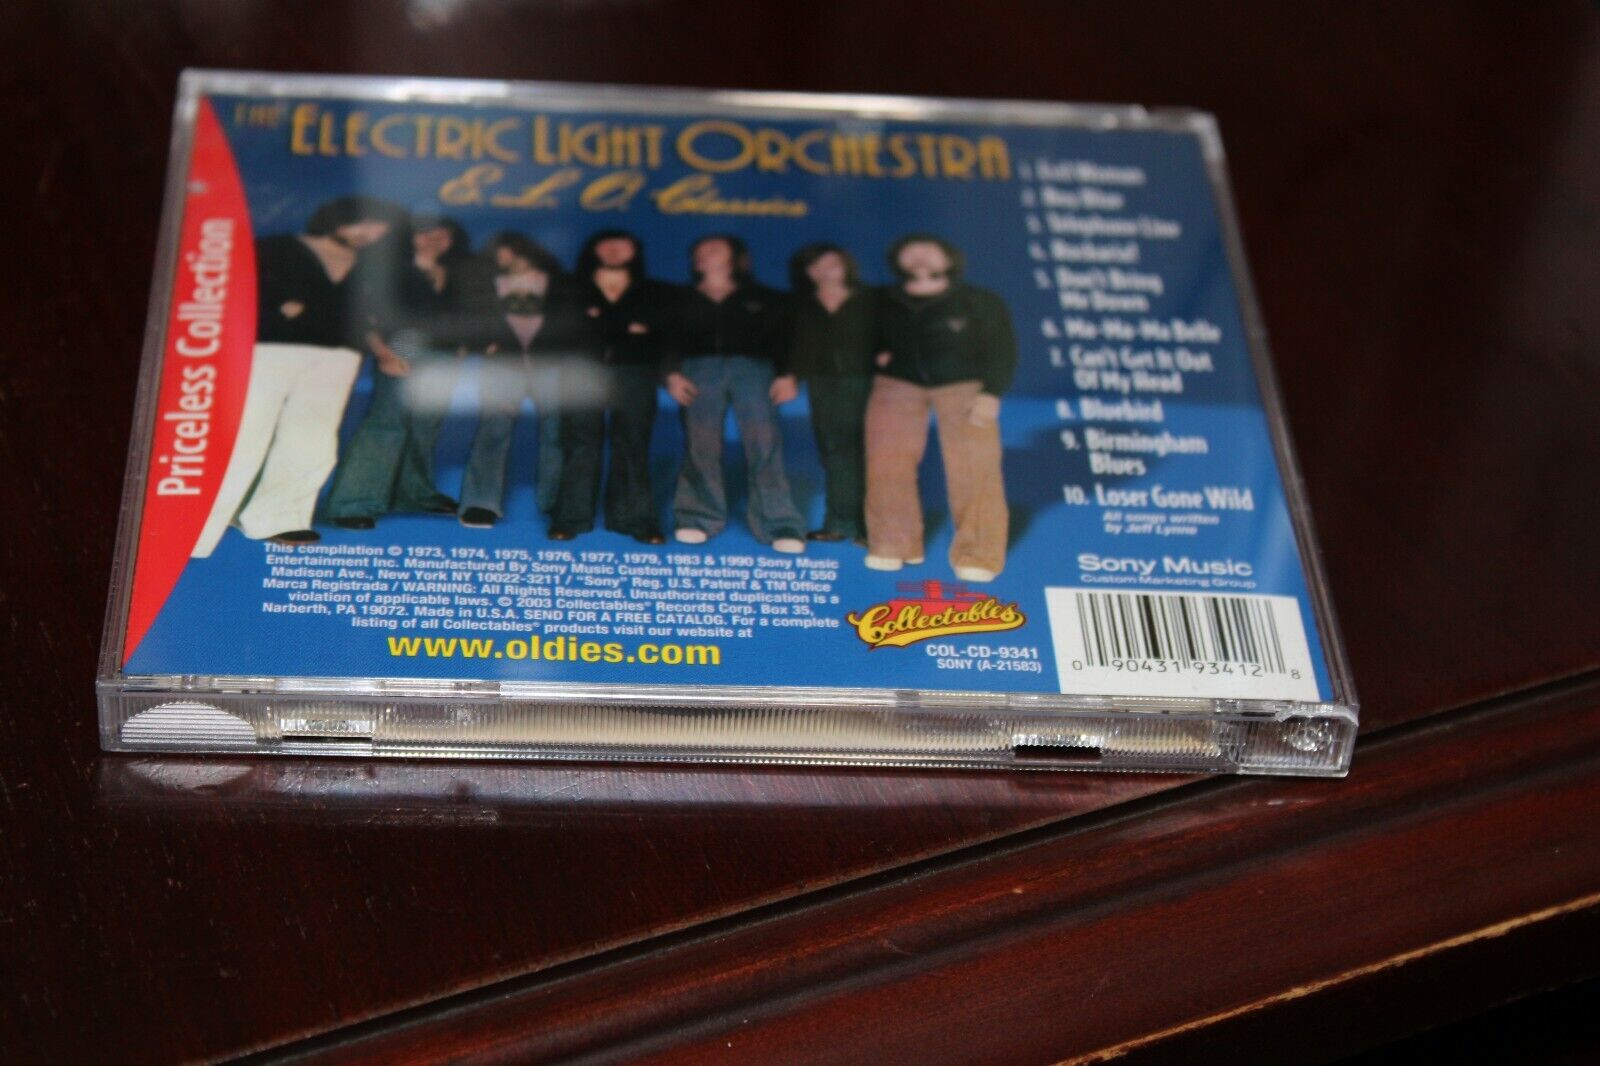 ELO Classics [Priceless Collection] by Electric Light Orchestra 